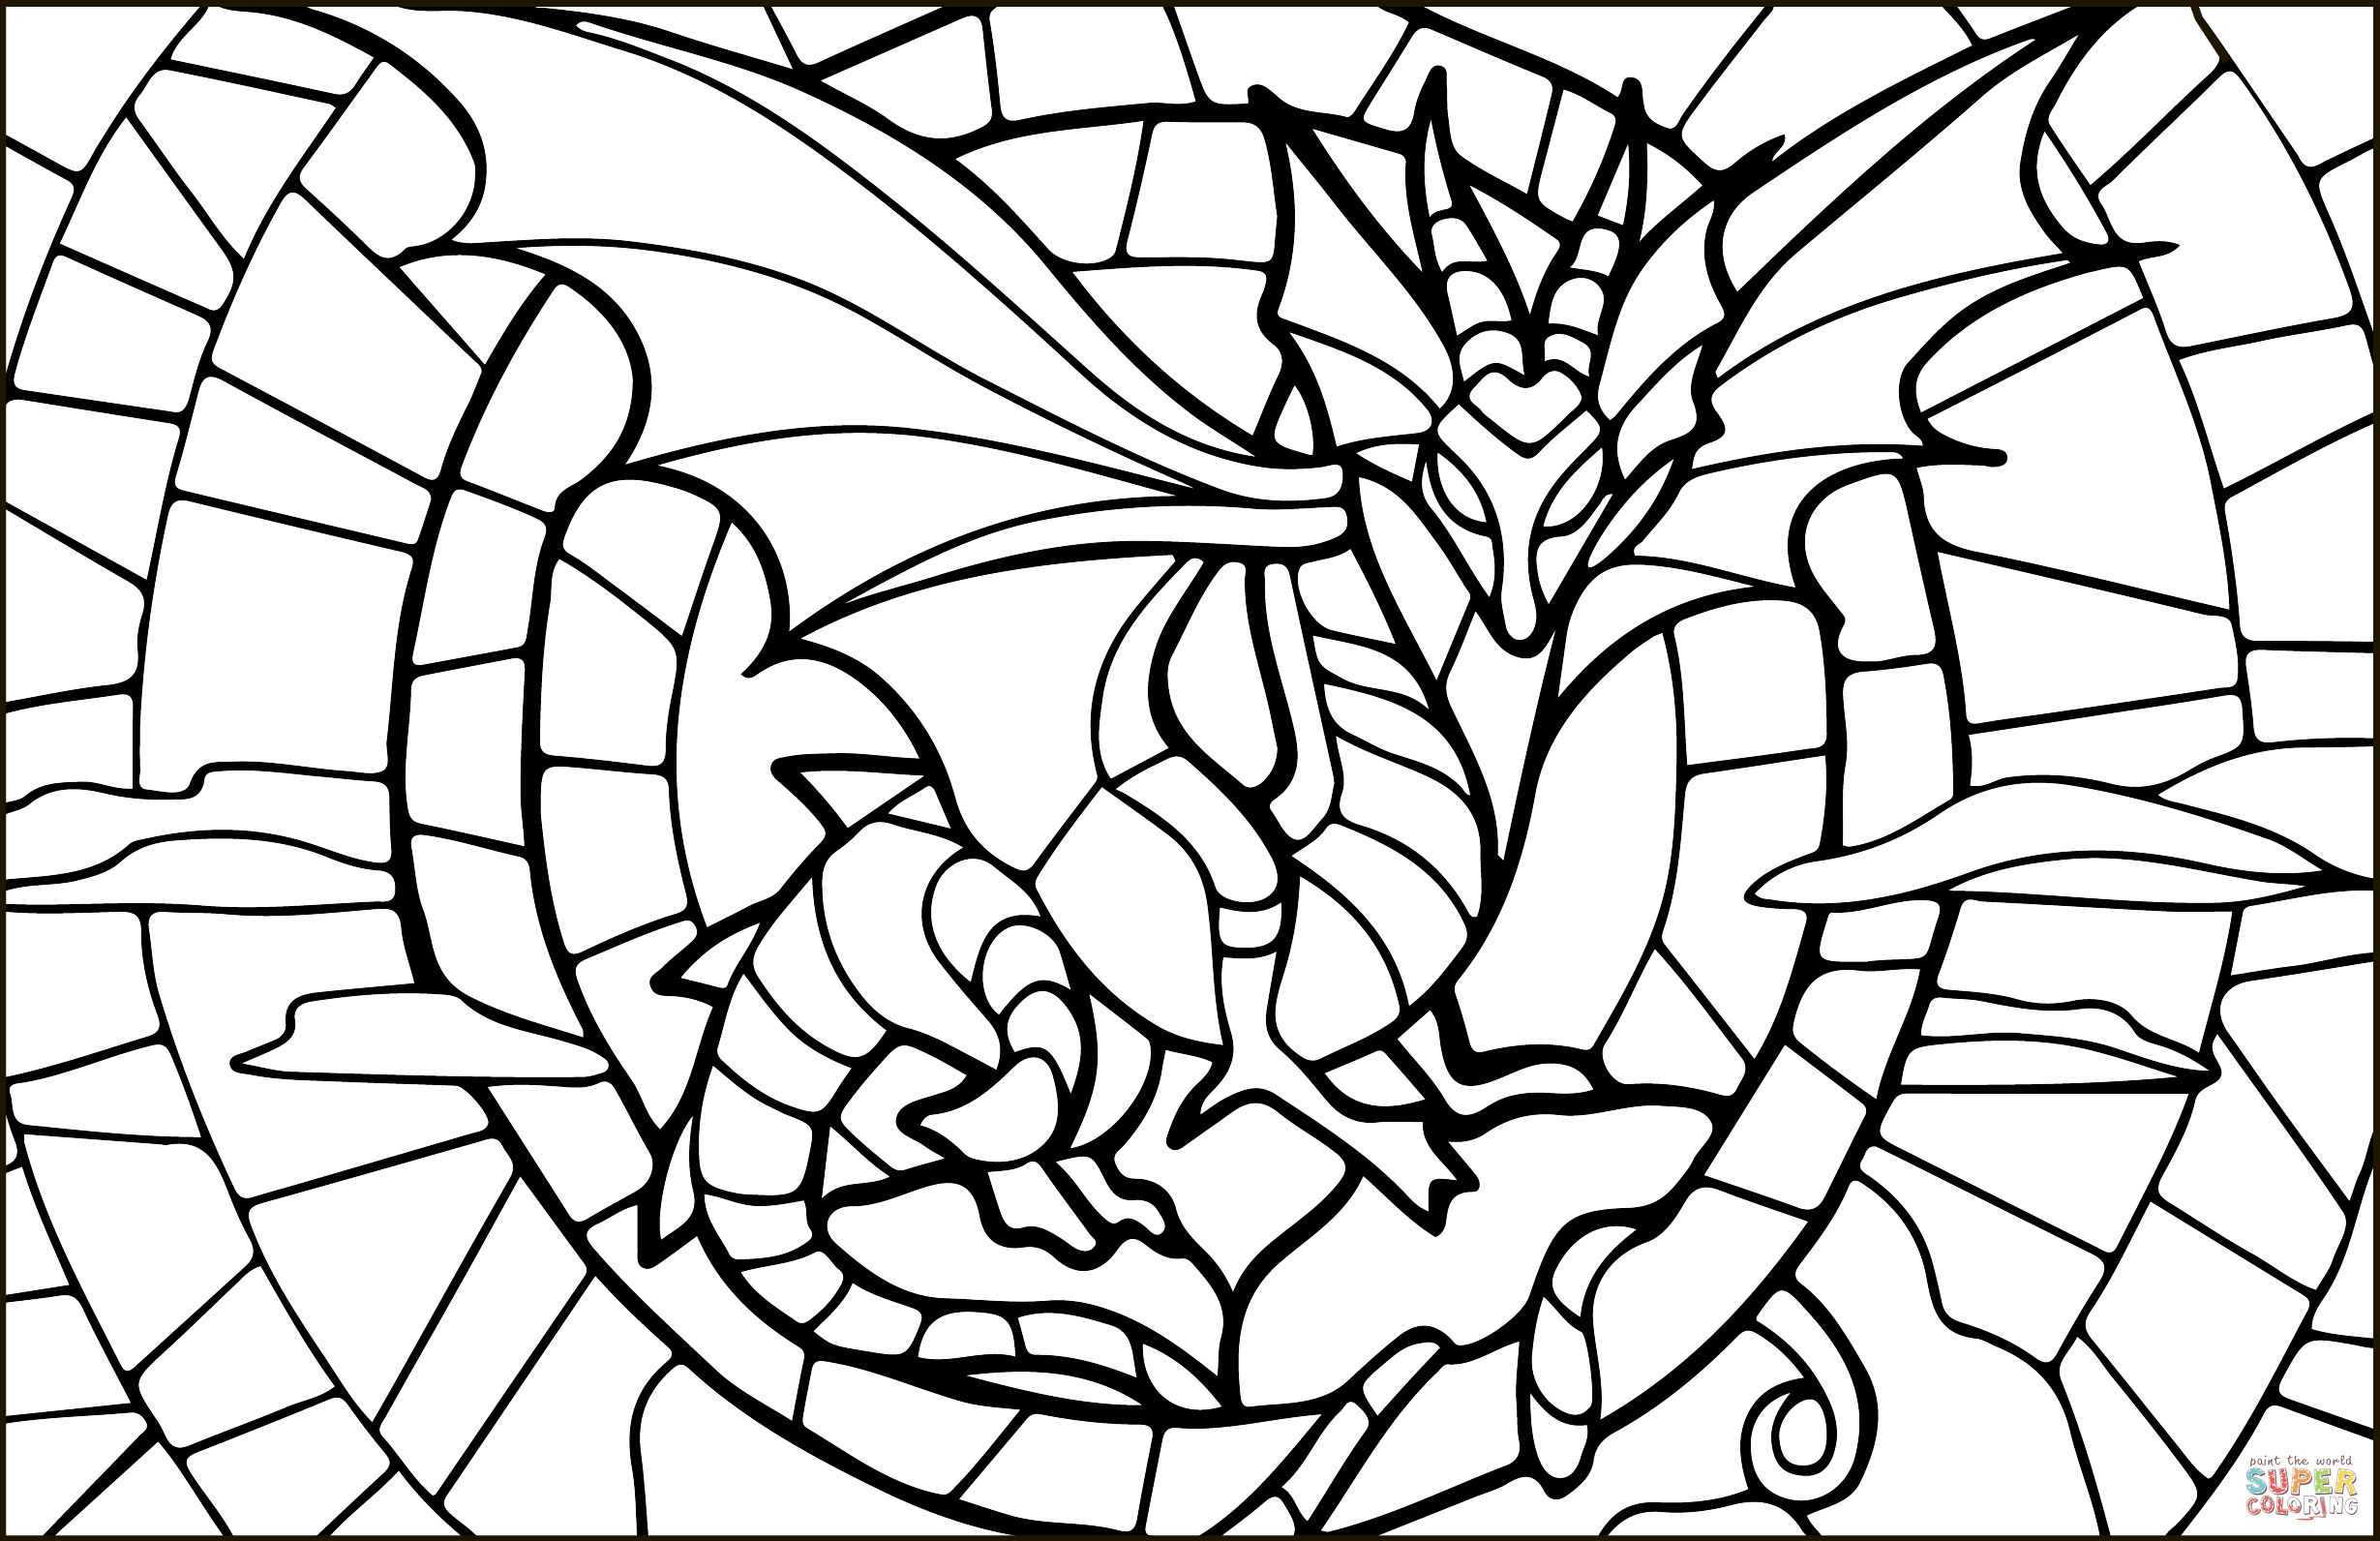 Dragon stained glass coloring page free printable coloring pages